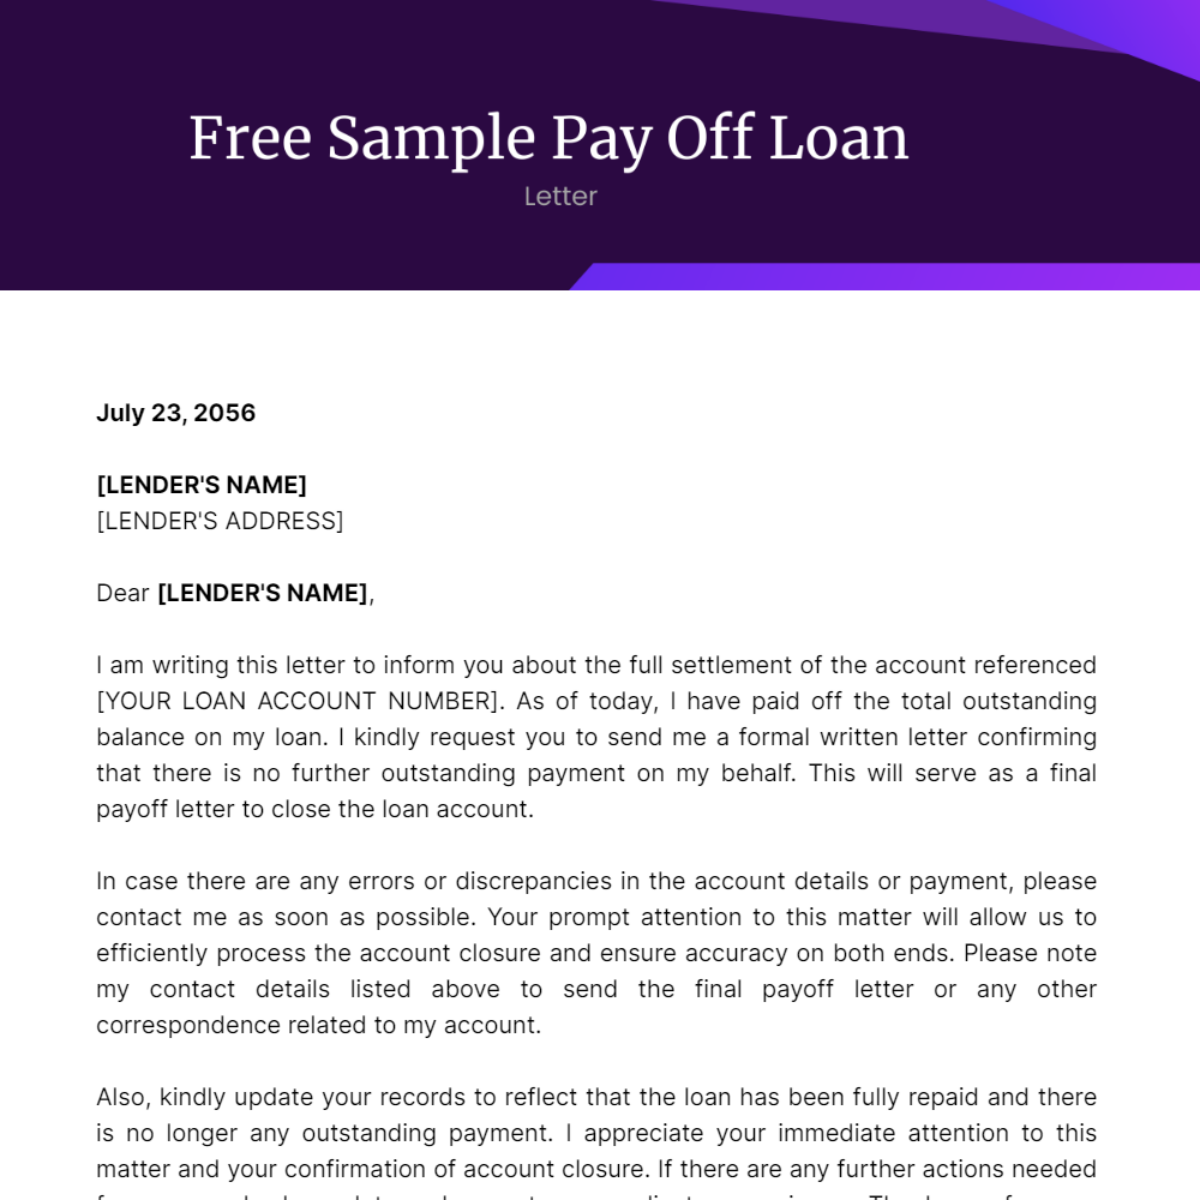 Sample Pay Off Loan Letter Template